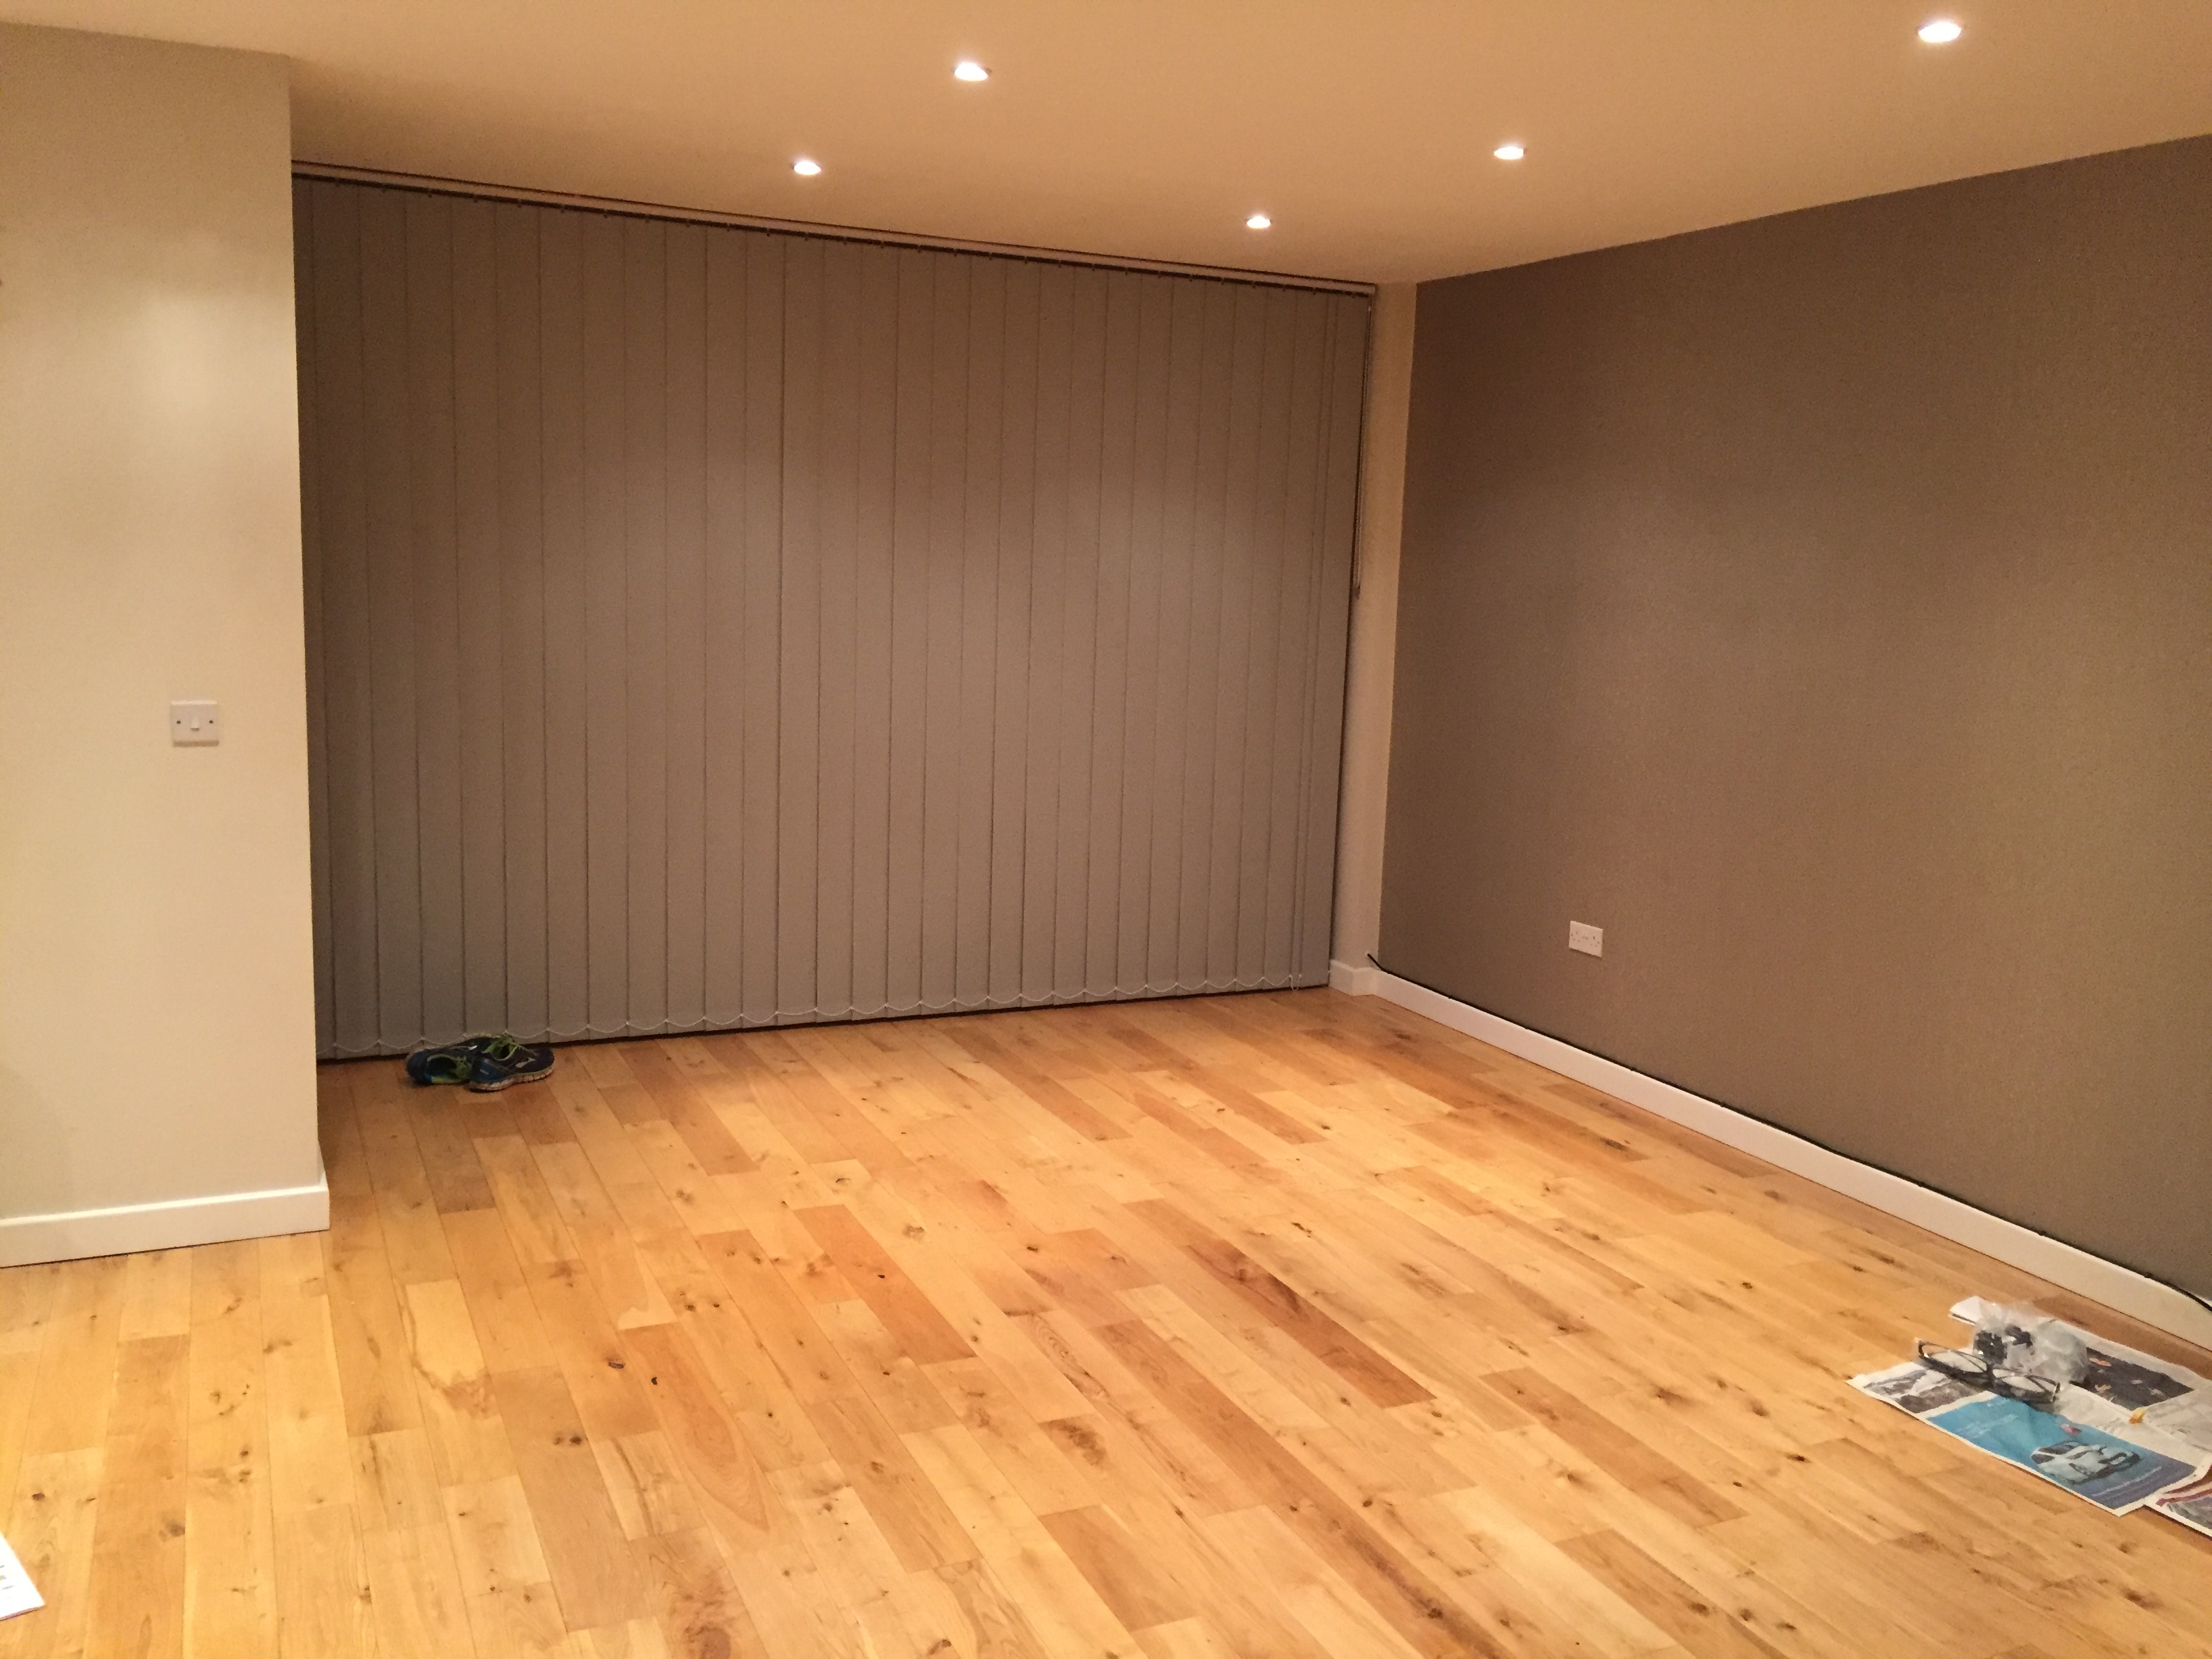 A photo of the client's living room which is fairly bare and uninviting